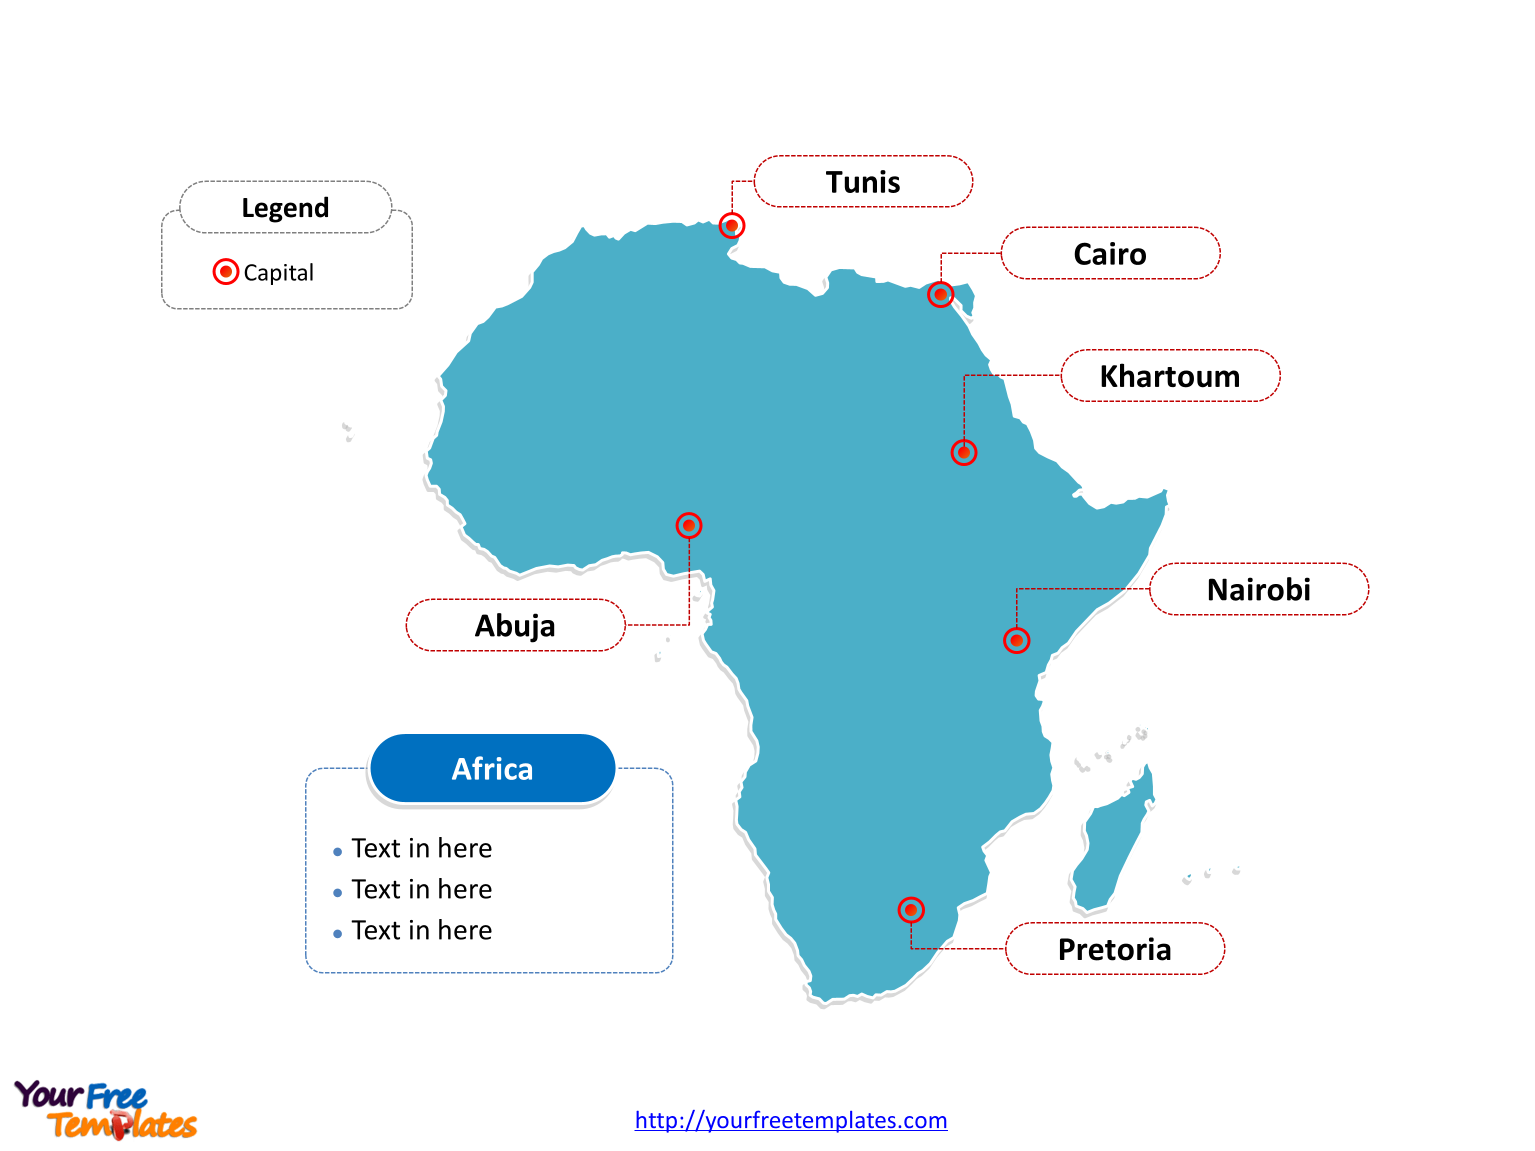 Map of Africa with outline and cities labeled on the Africa map free templates, or African continent map